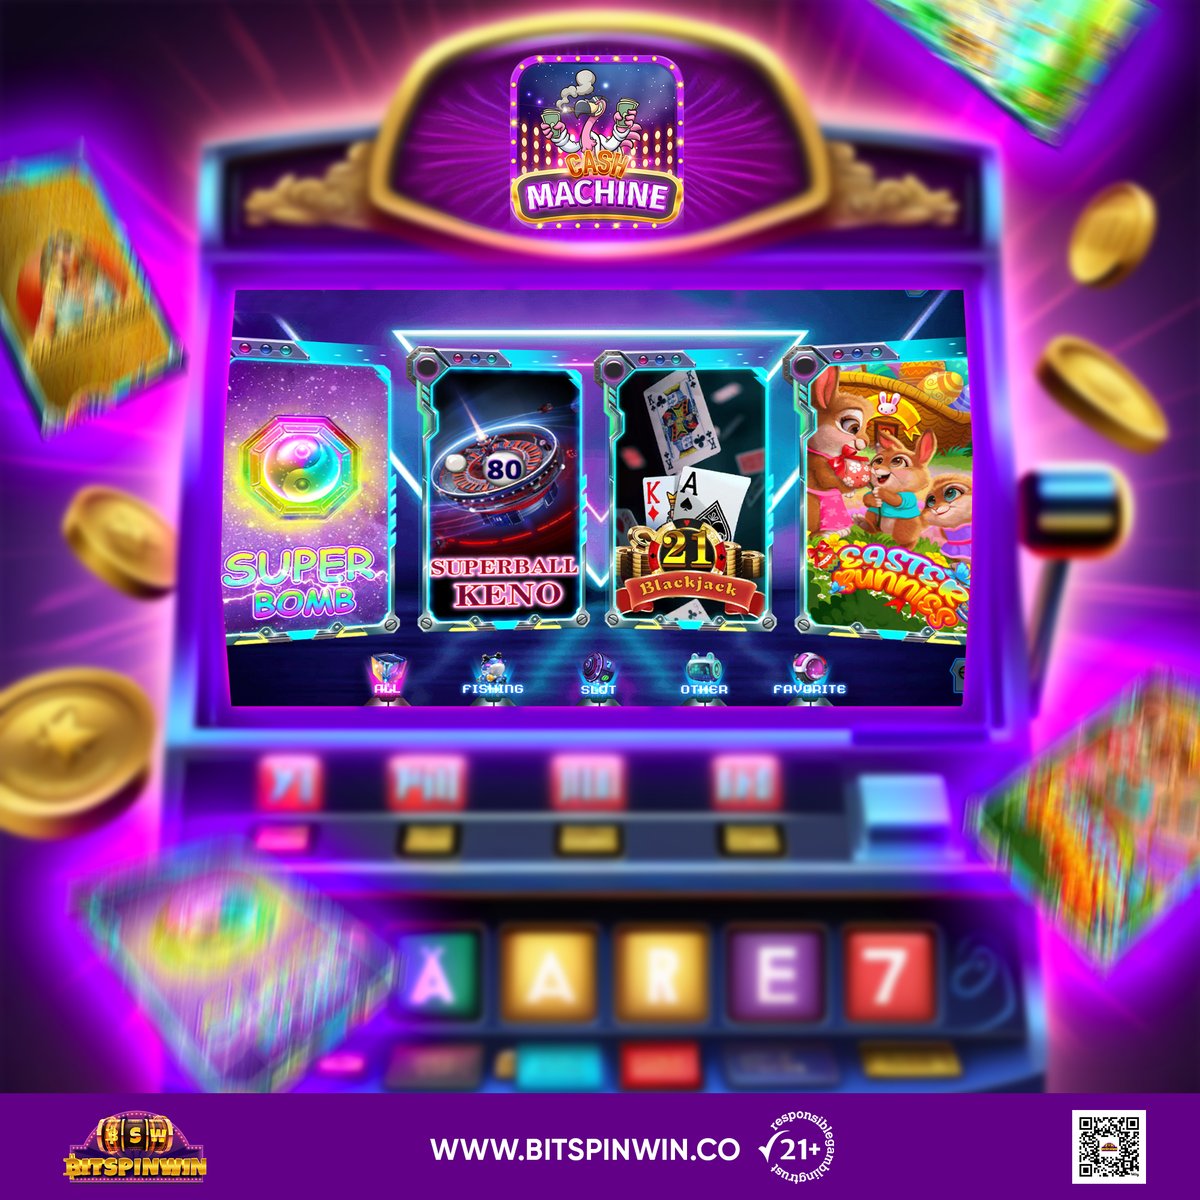 🔥🎰𝐂𝐚𝐬𝐡 𝐌𝐚𝐜𝐡𝐢𝐧𝐞 𝐉𝐚𝐜𝐤𝐩𝐨𝐭'𝐬 𝐨𝐧 𝐅𝐢𝐫𝐞! Explore the ultimate gaming platform featuring the most exciting casino games! 💰𝐃𝐈𝐒𝐂𝐎𝐕𝐄𝐑 𝐍𝐎𝐖: t.ly/cashmachine_tw . #USA #TrendingNow #OnlineCasino #BitcoinCash #slotgames #GamblingTwitter #casinoparty